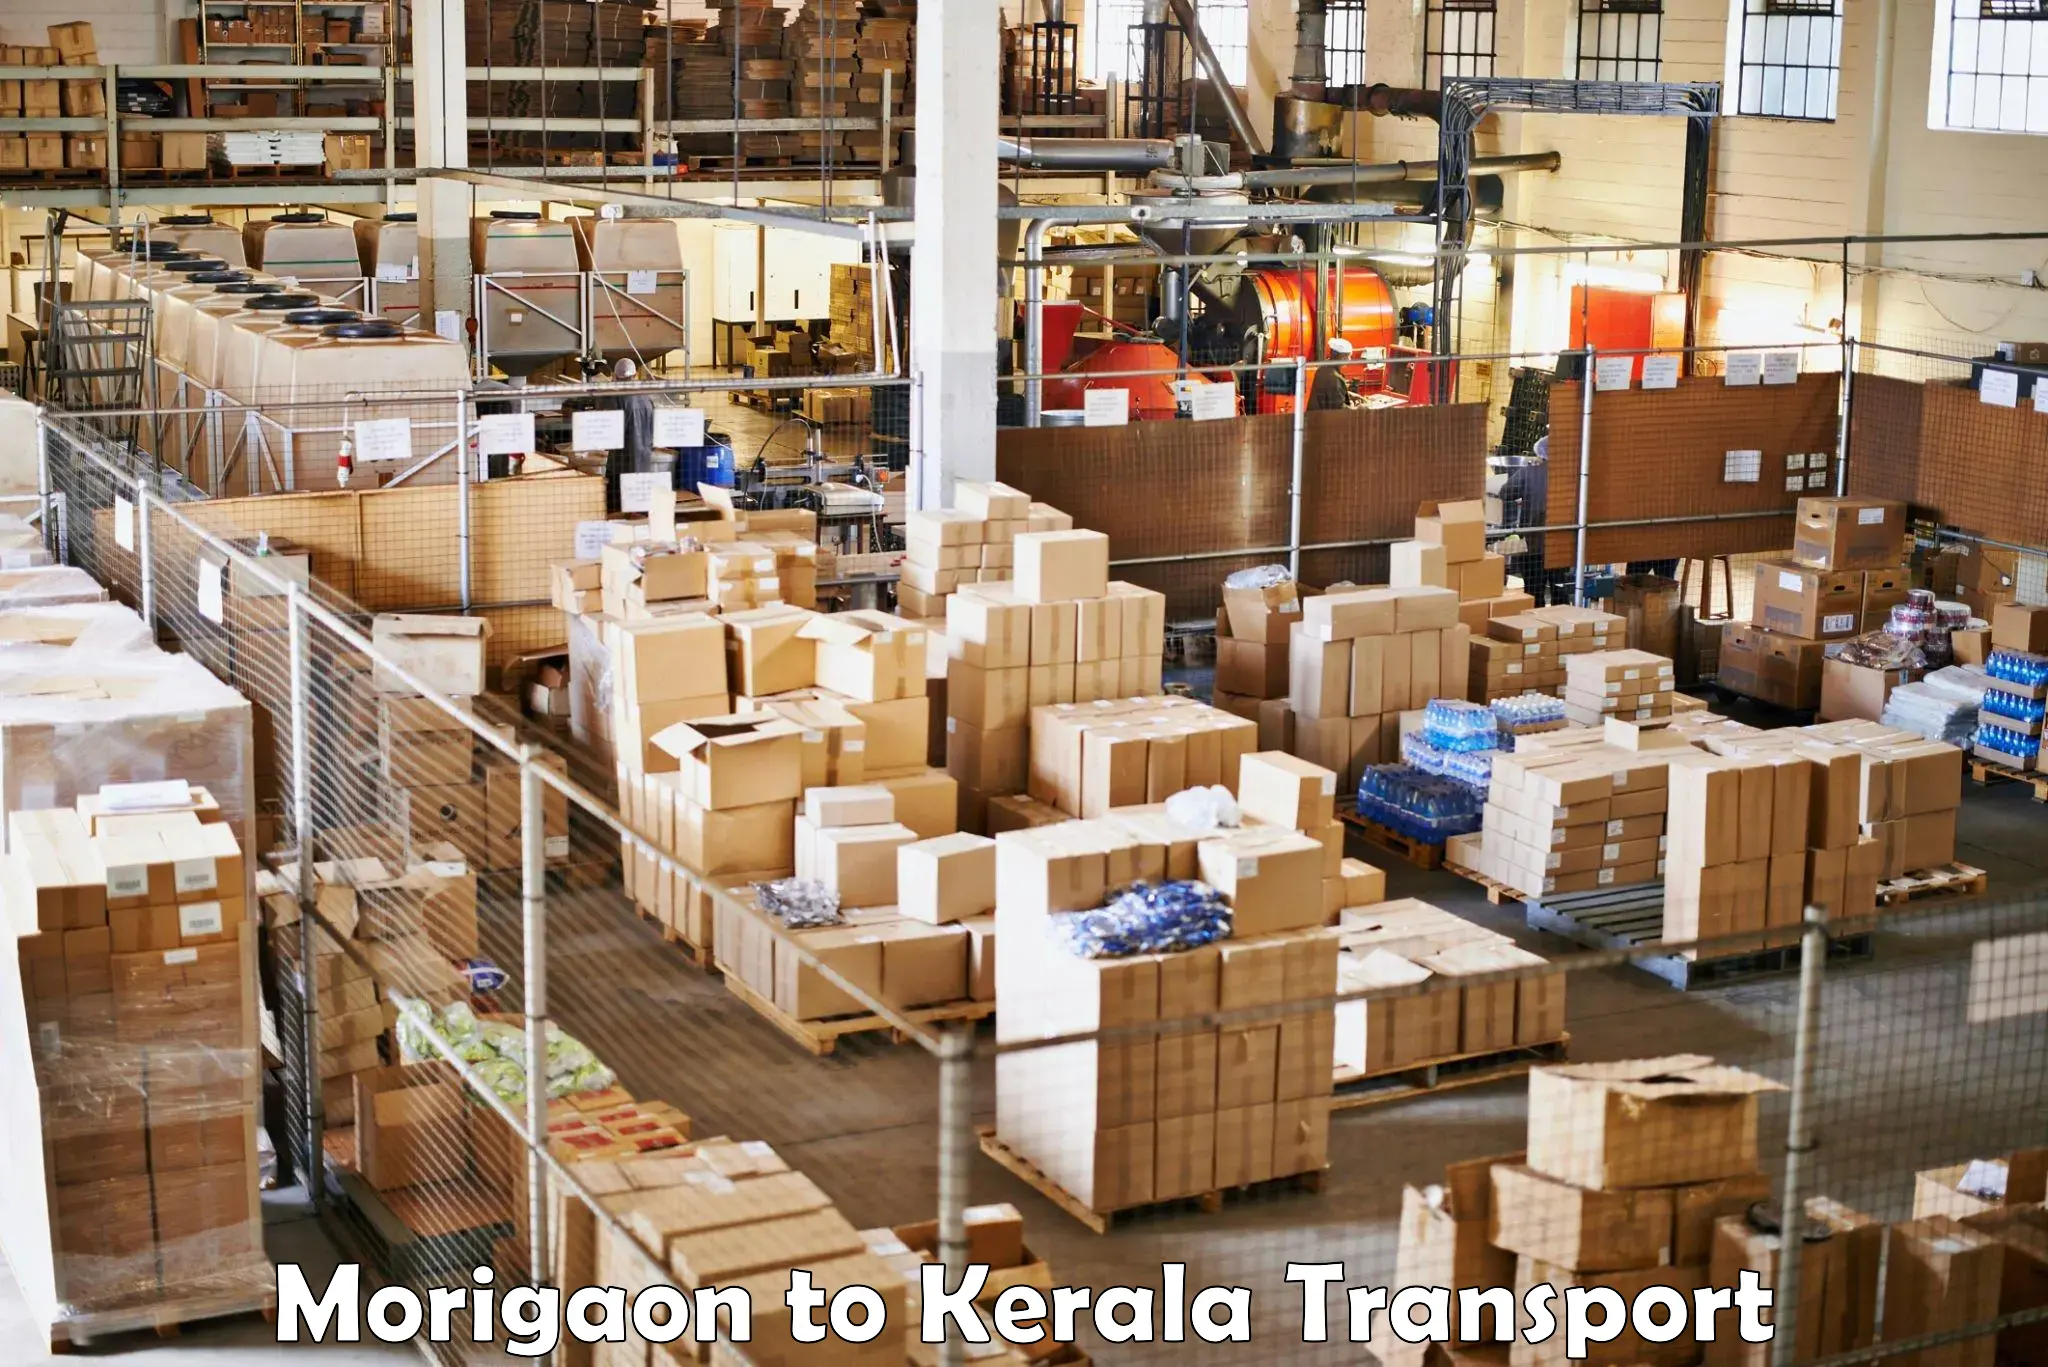 Daily parcel service transport in Morigaon to Kozhencherry